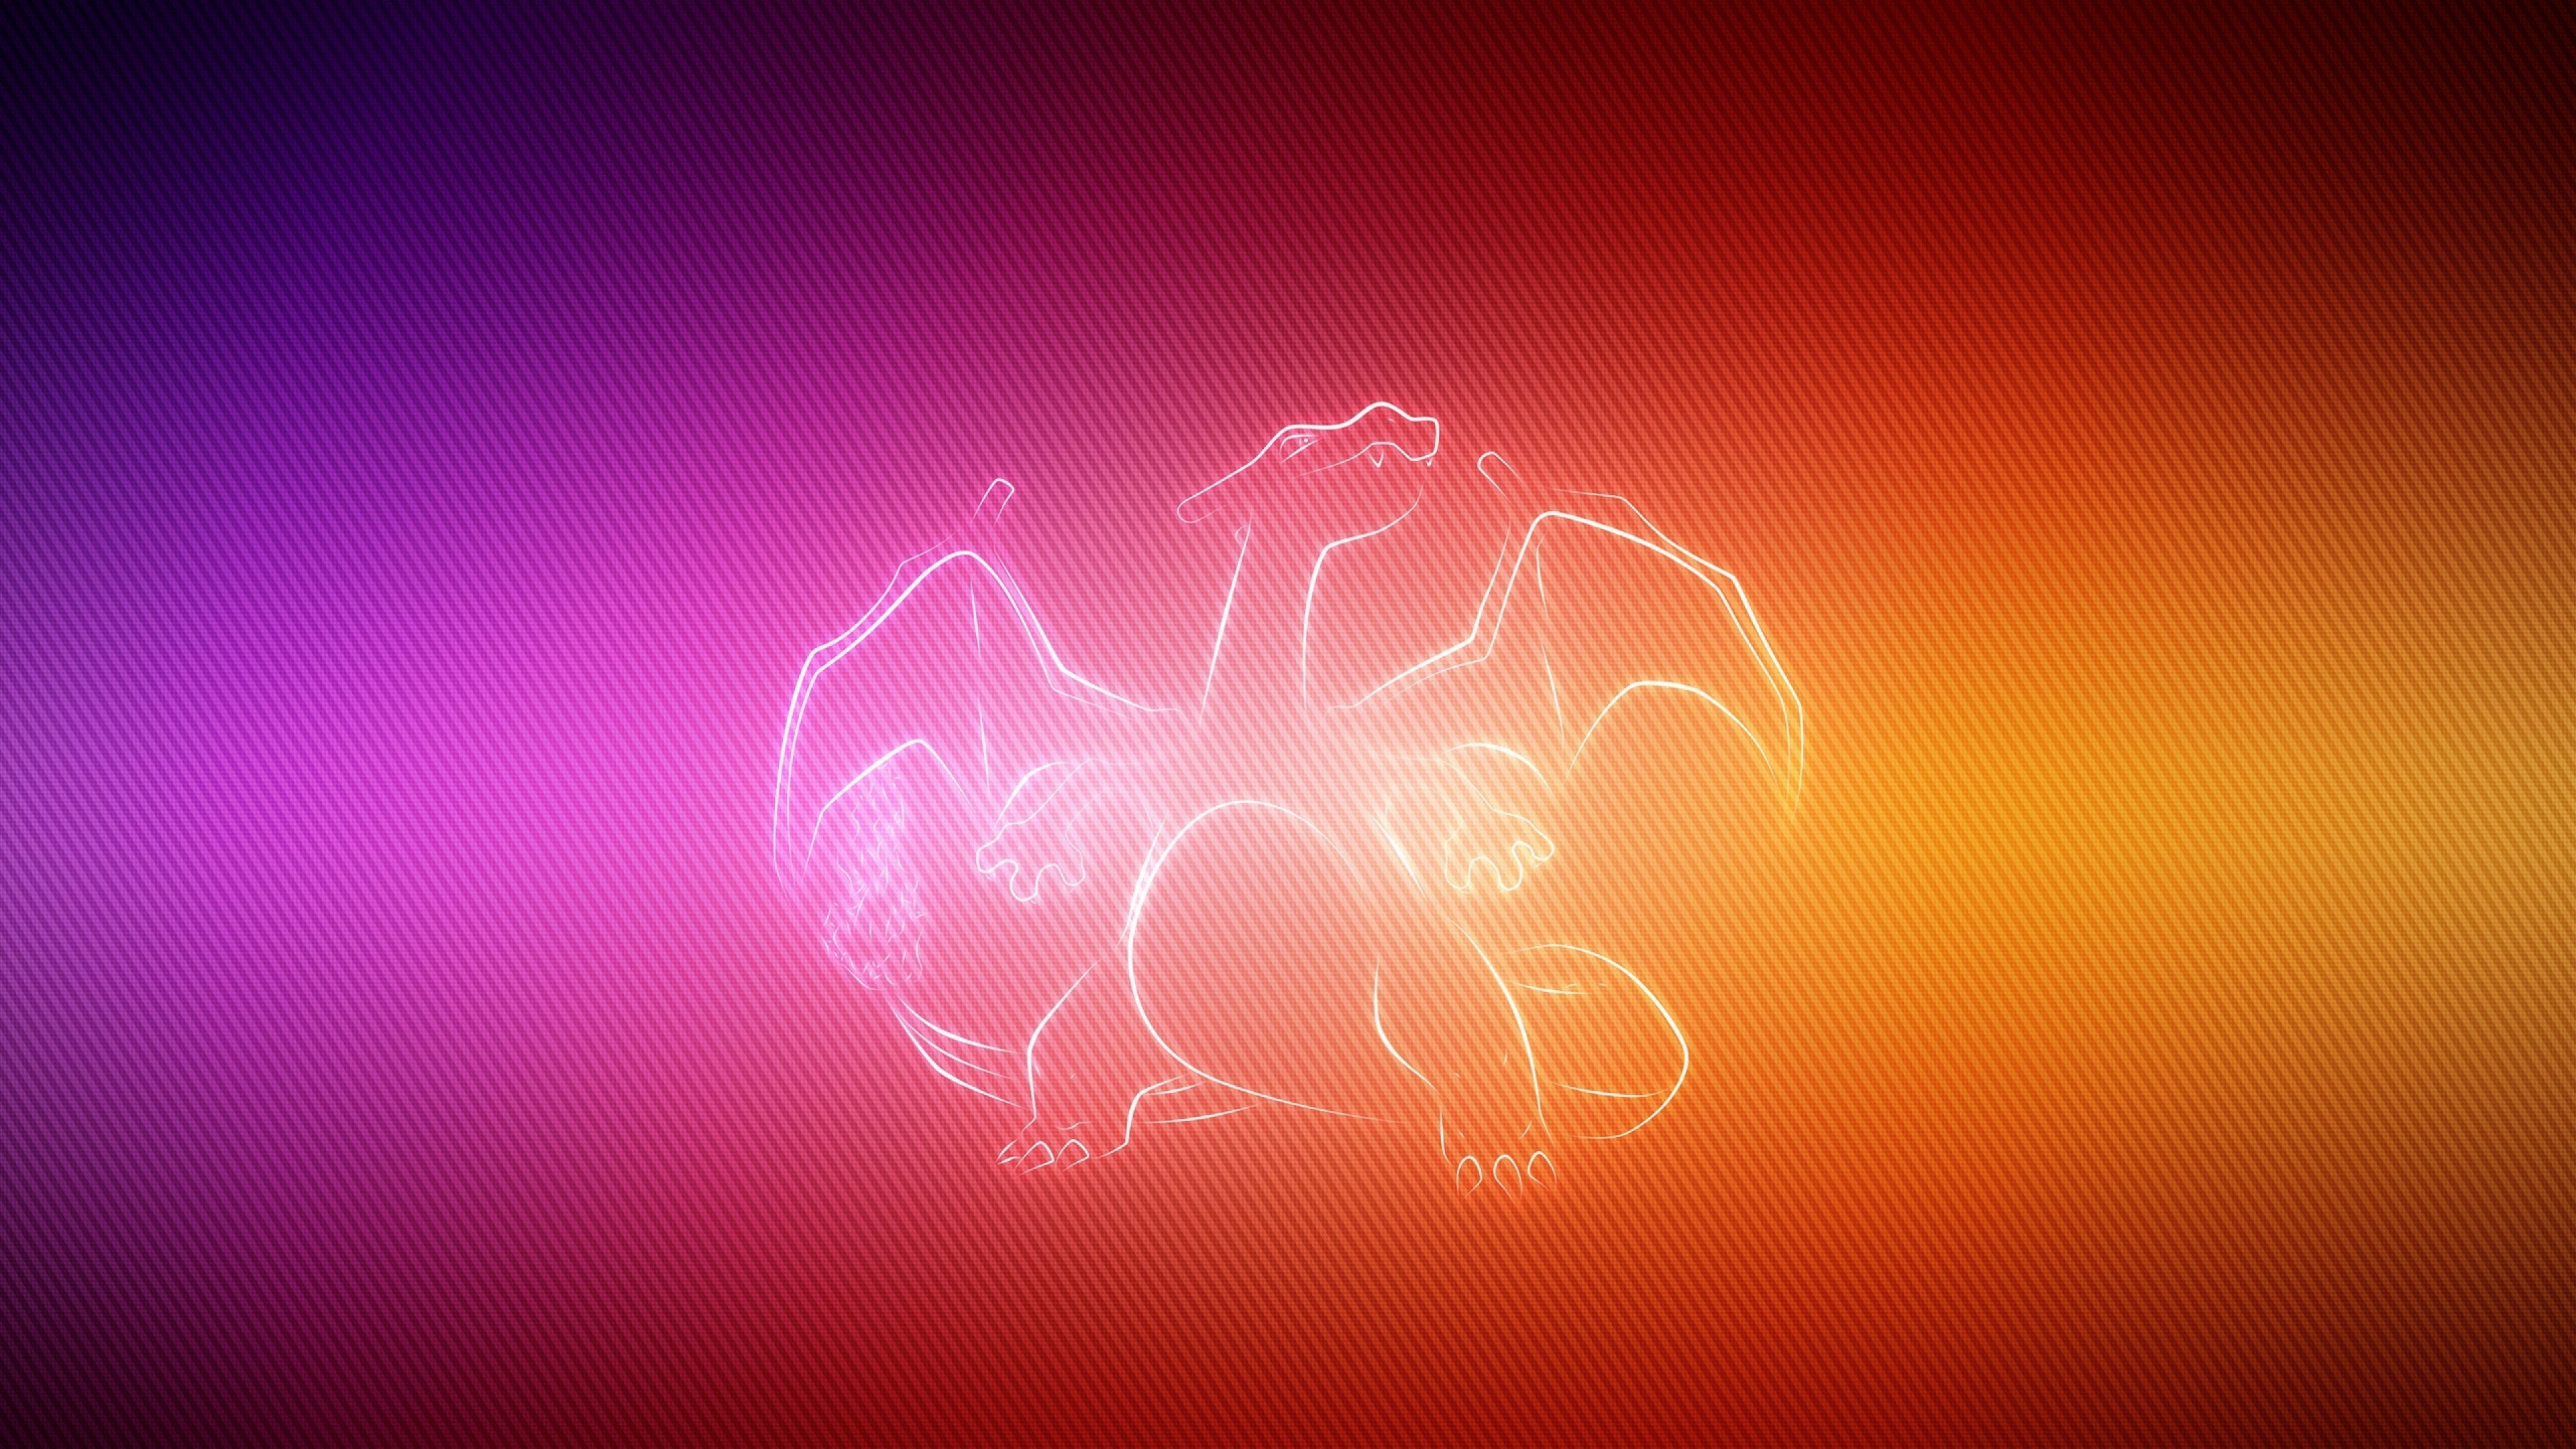 dragon simple background 4k 1540748486 - Dragon Simple Background 4k - simple background wallpapers, dragon wallpapers, artist wallpapers